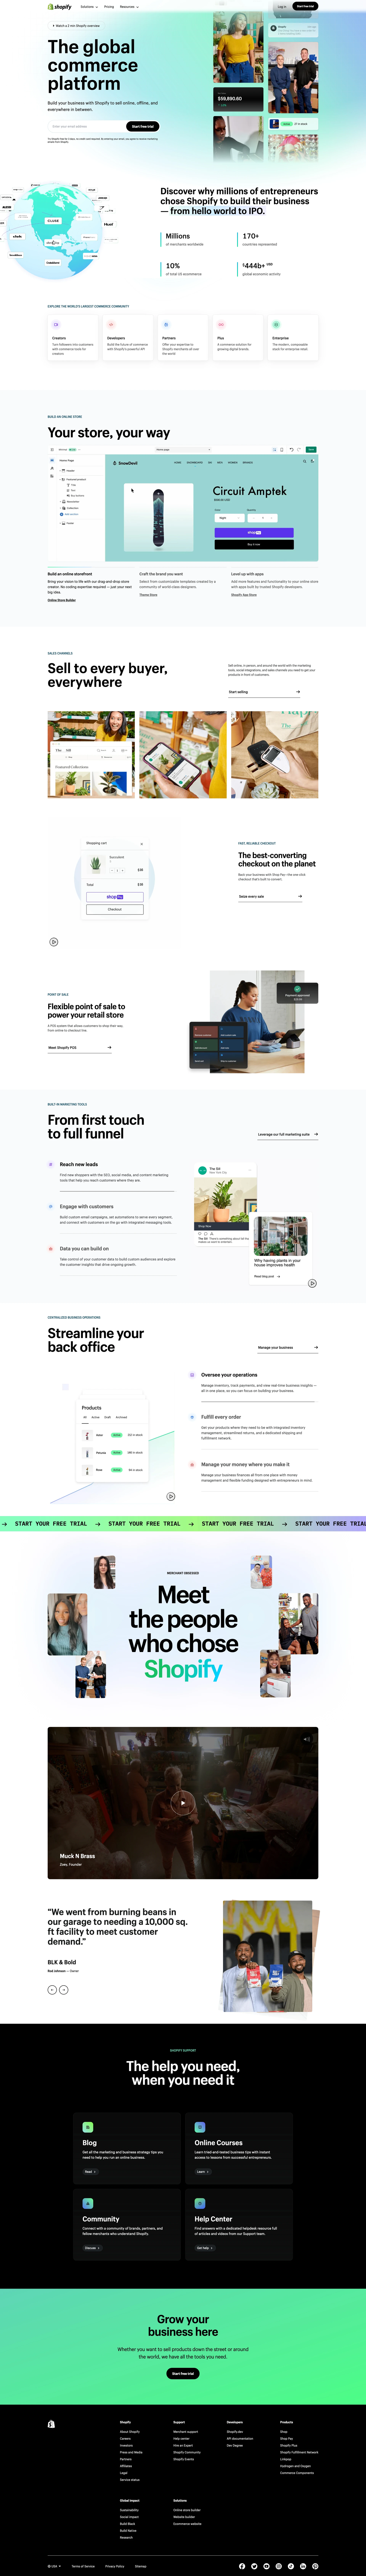 Shopify Landing Page Example: The global commerce platform. Build your business with Shopify to sell online, offline, and everywhere in between.